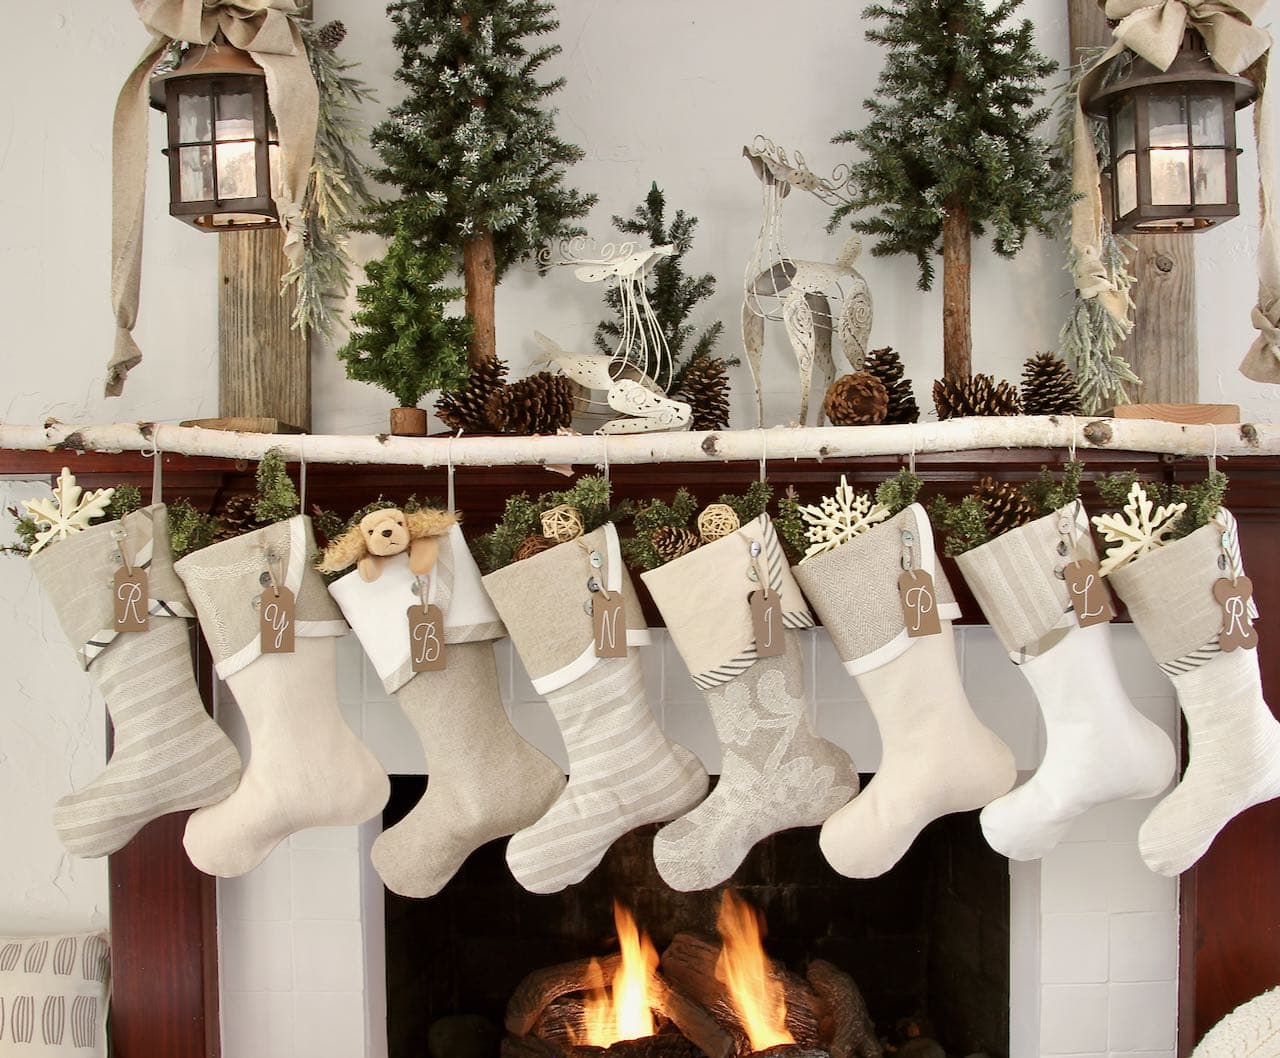 Full view of the finished mantel with 8 Farmhouse Christmas stockings hanging from the birch branch